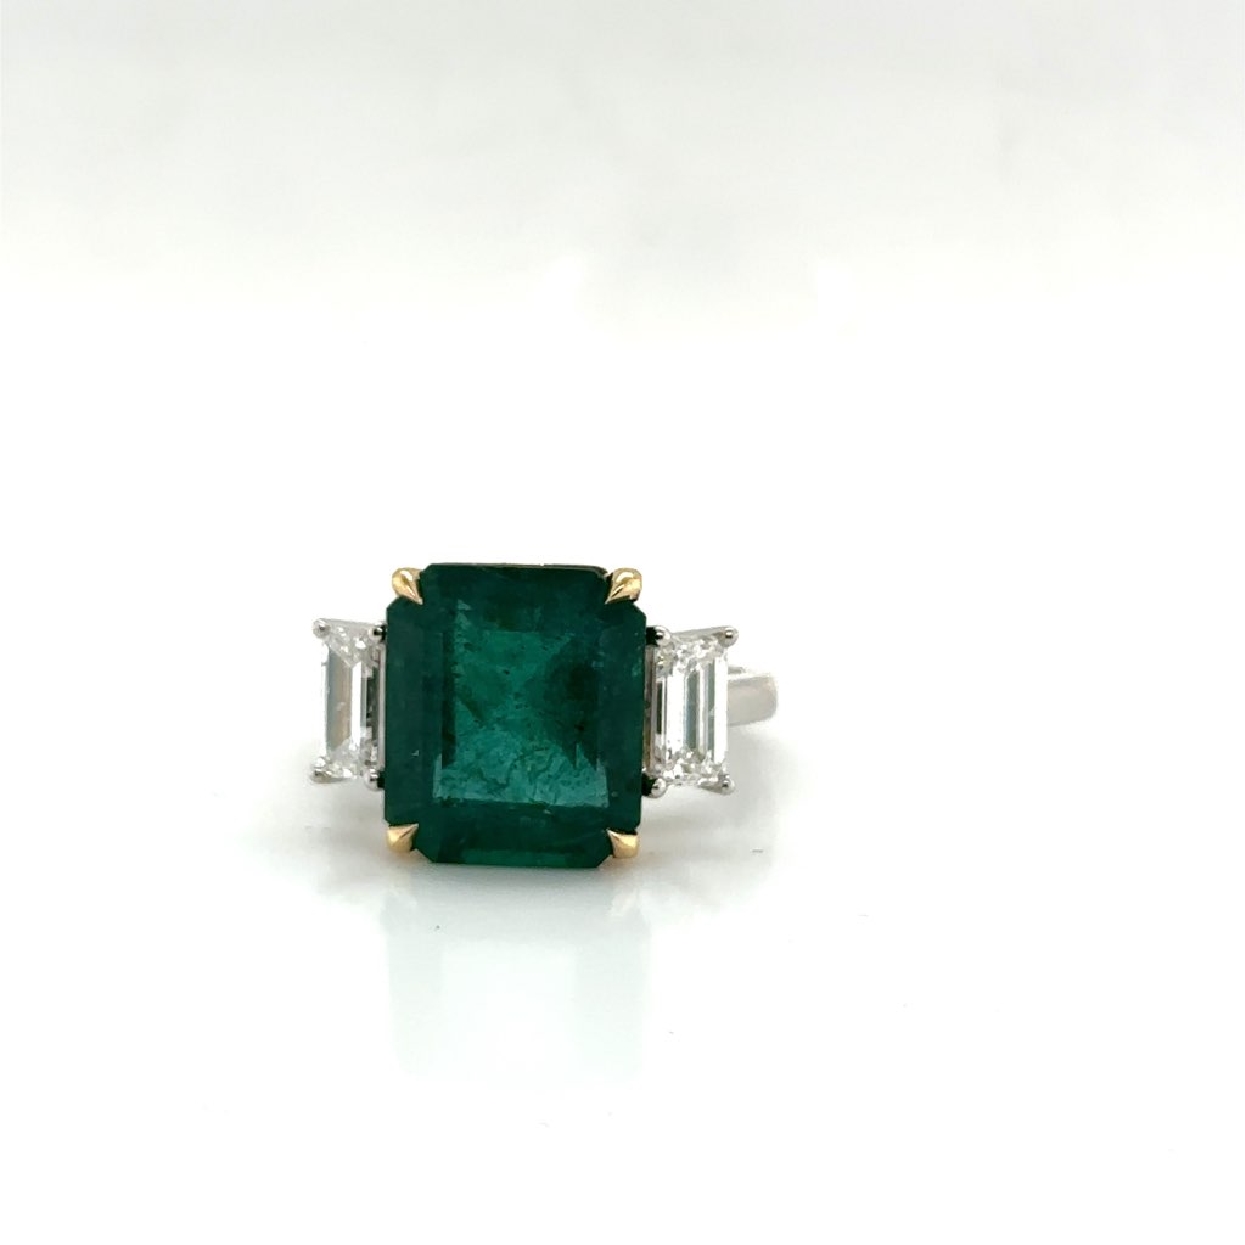 18K White and Yellow Gold Ring with a Square Cut Emerald 7.8 ct and Diamond Baguette Accents 1.24 ct 
Size 7.25 